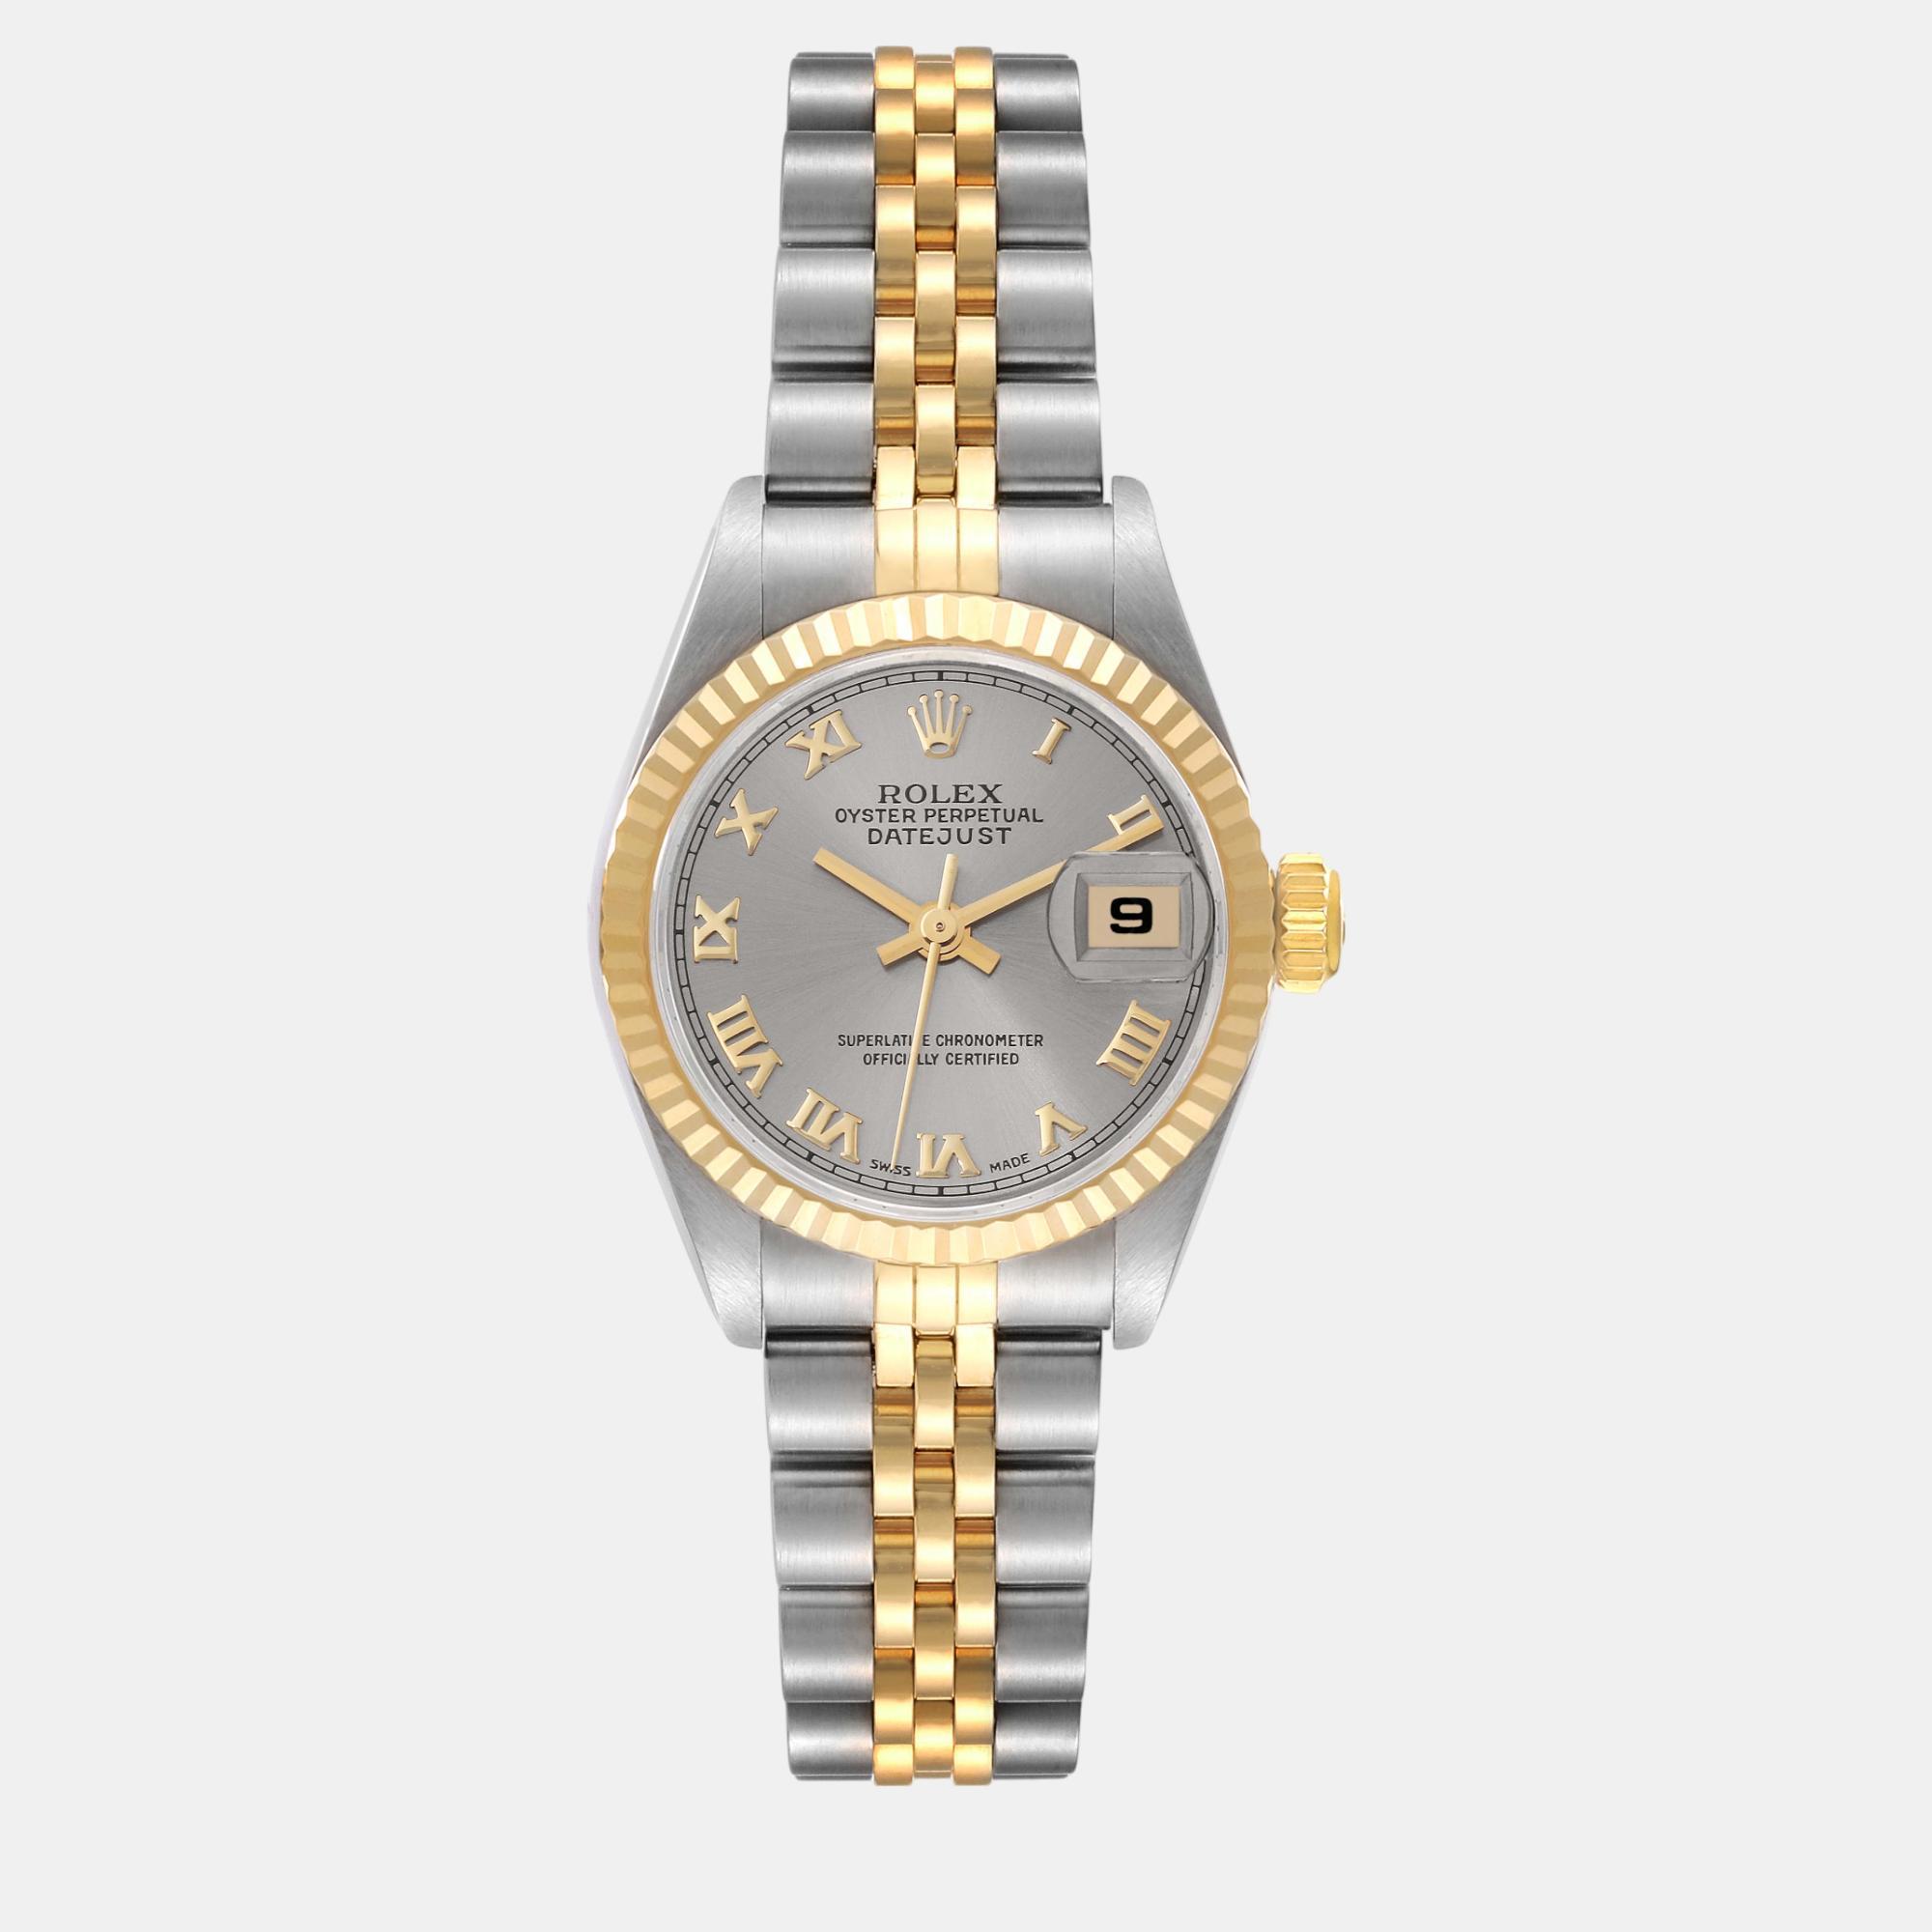 Rolex datejust slate dial steel yellow gold ladies watch 26 mm